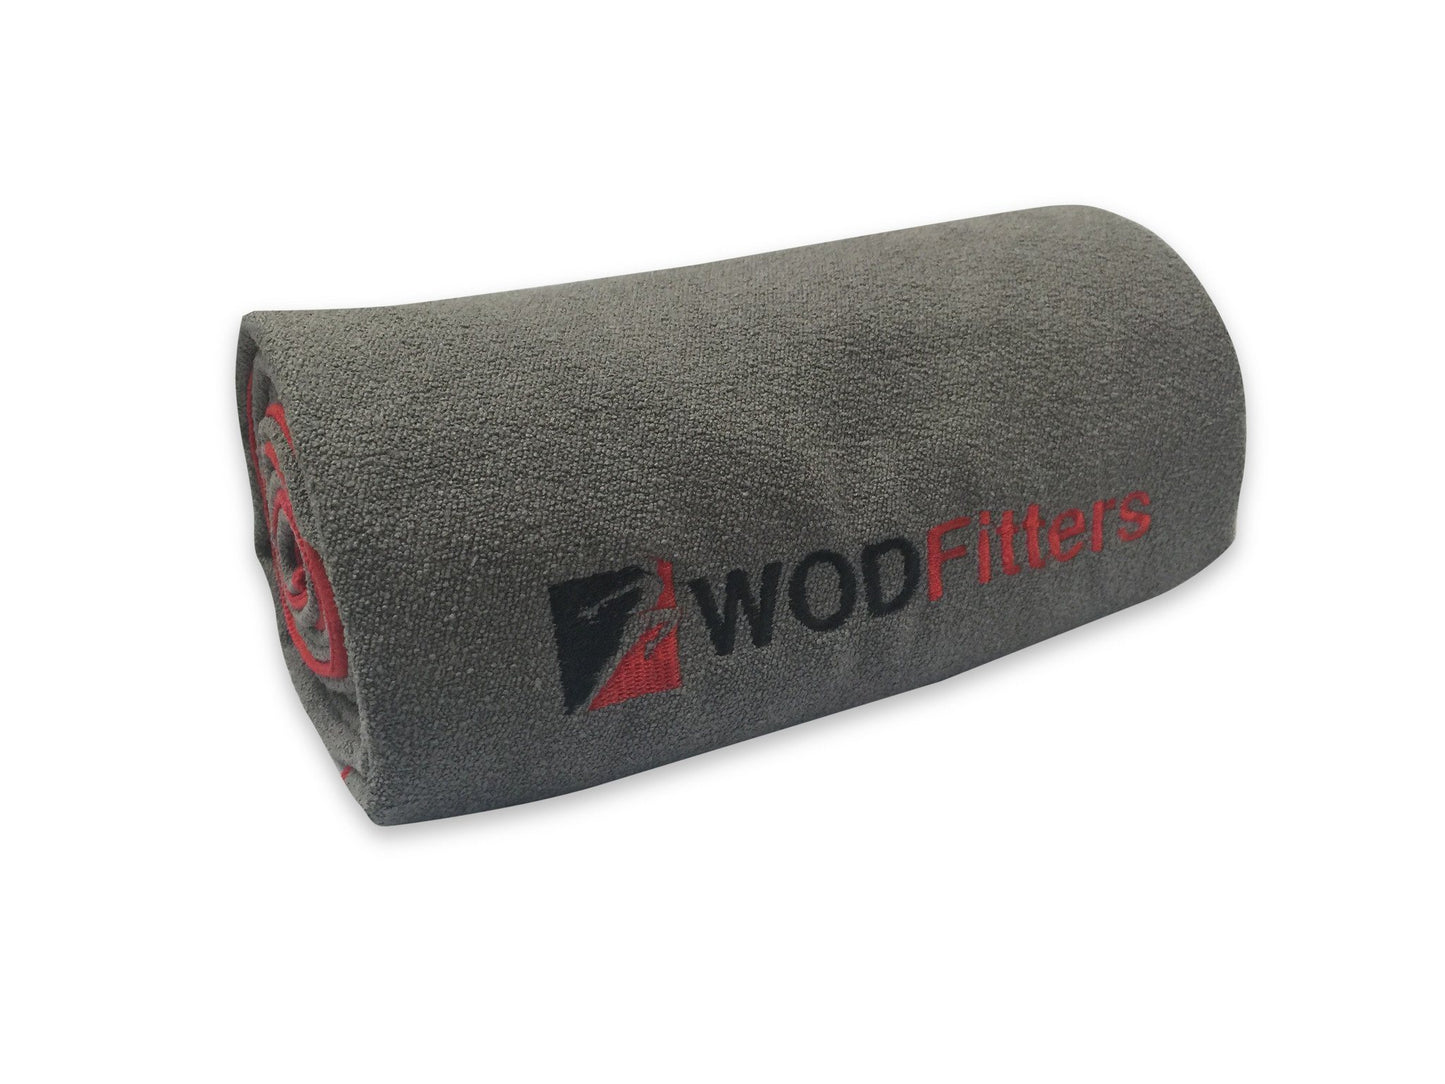 WODFitters Non Slip Microfiber Yoga Towel Mat with Corner Pockets and Carrying Bag 